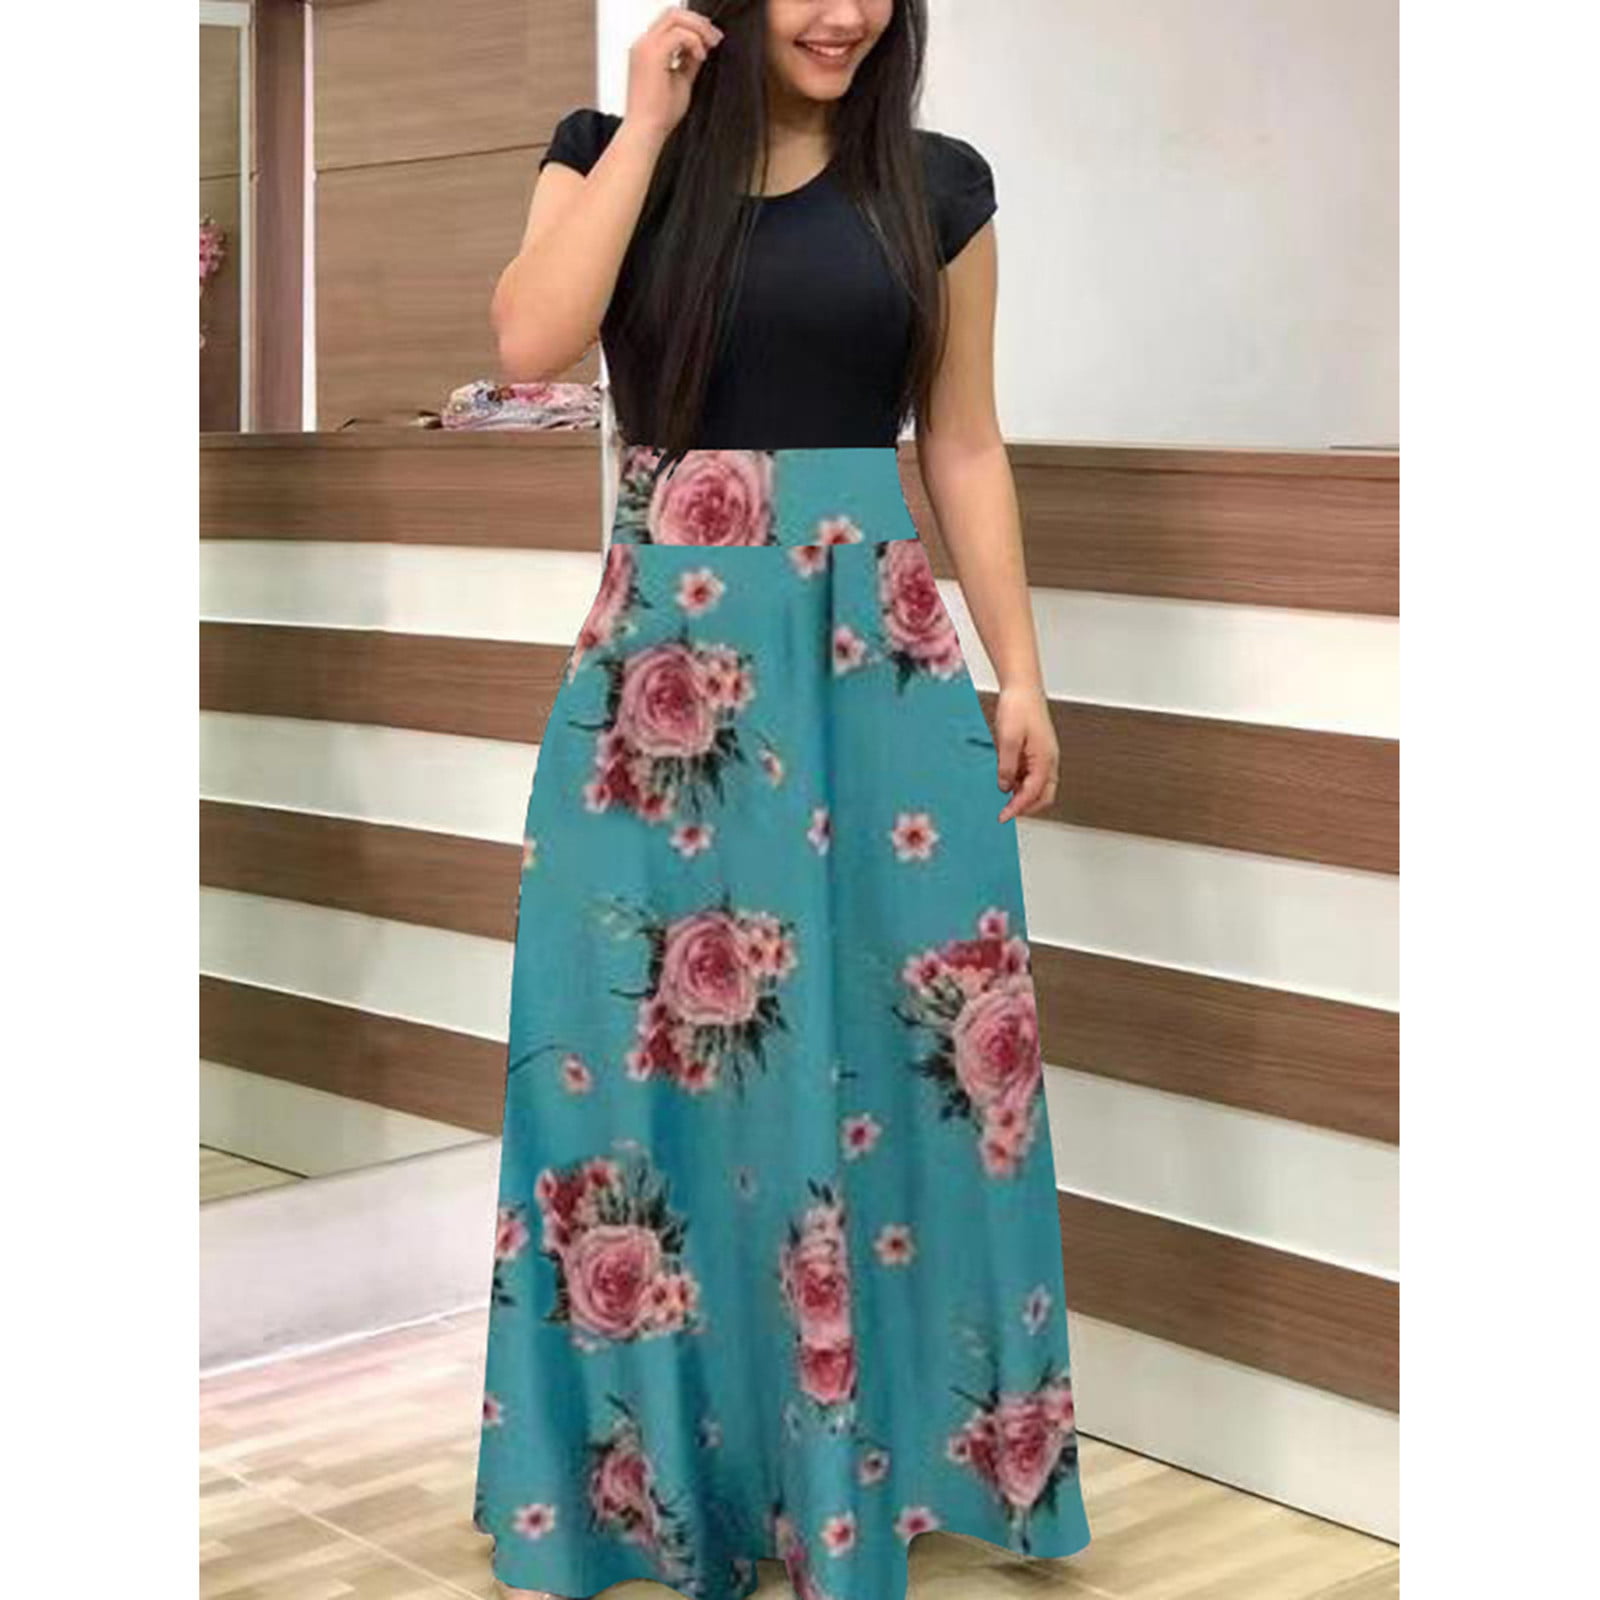 〖TOTO〗Maxi Dresses For Women Style Floral Print Color Matching Dress ...